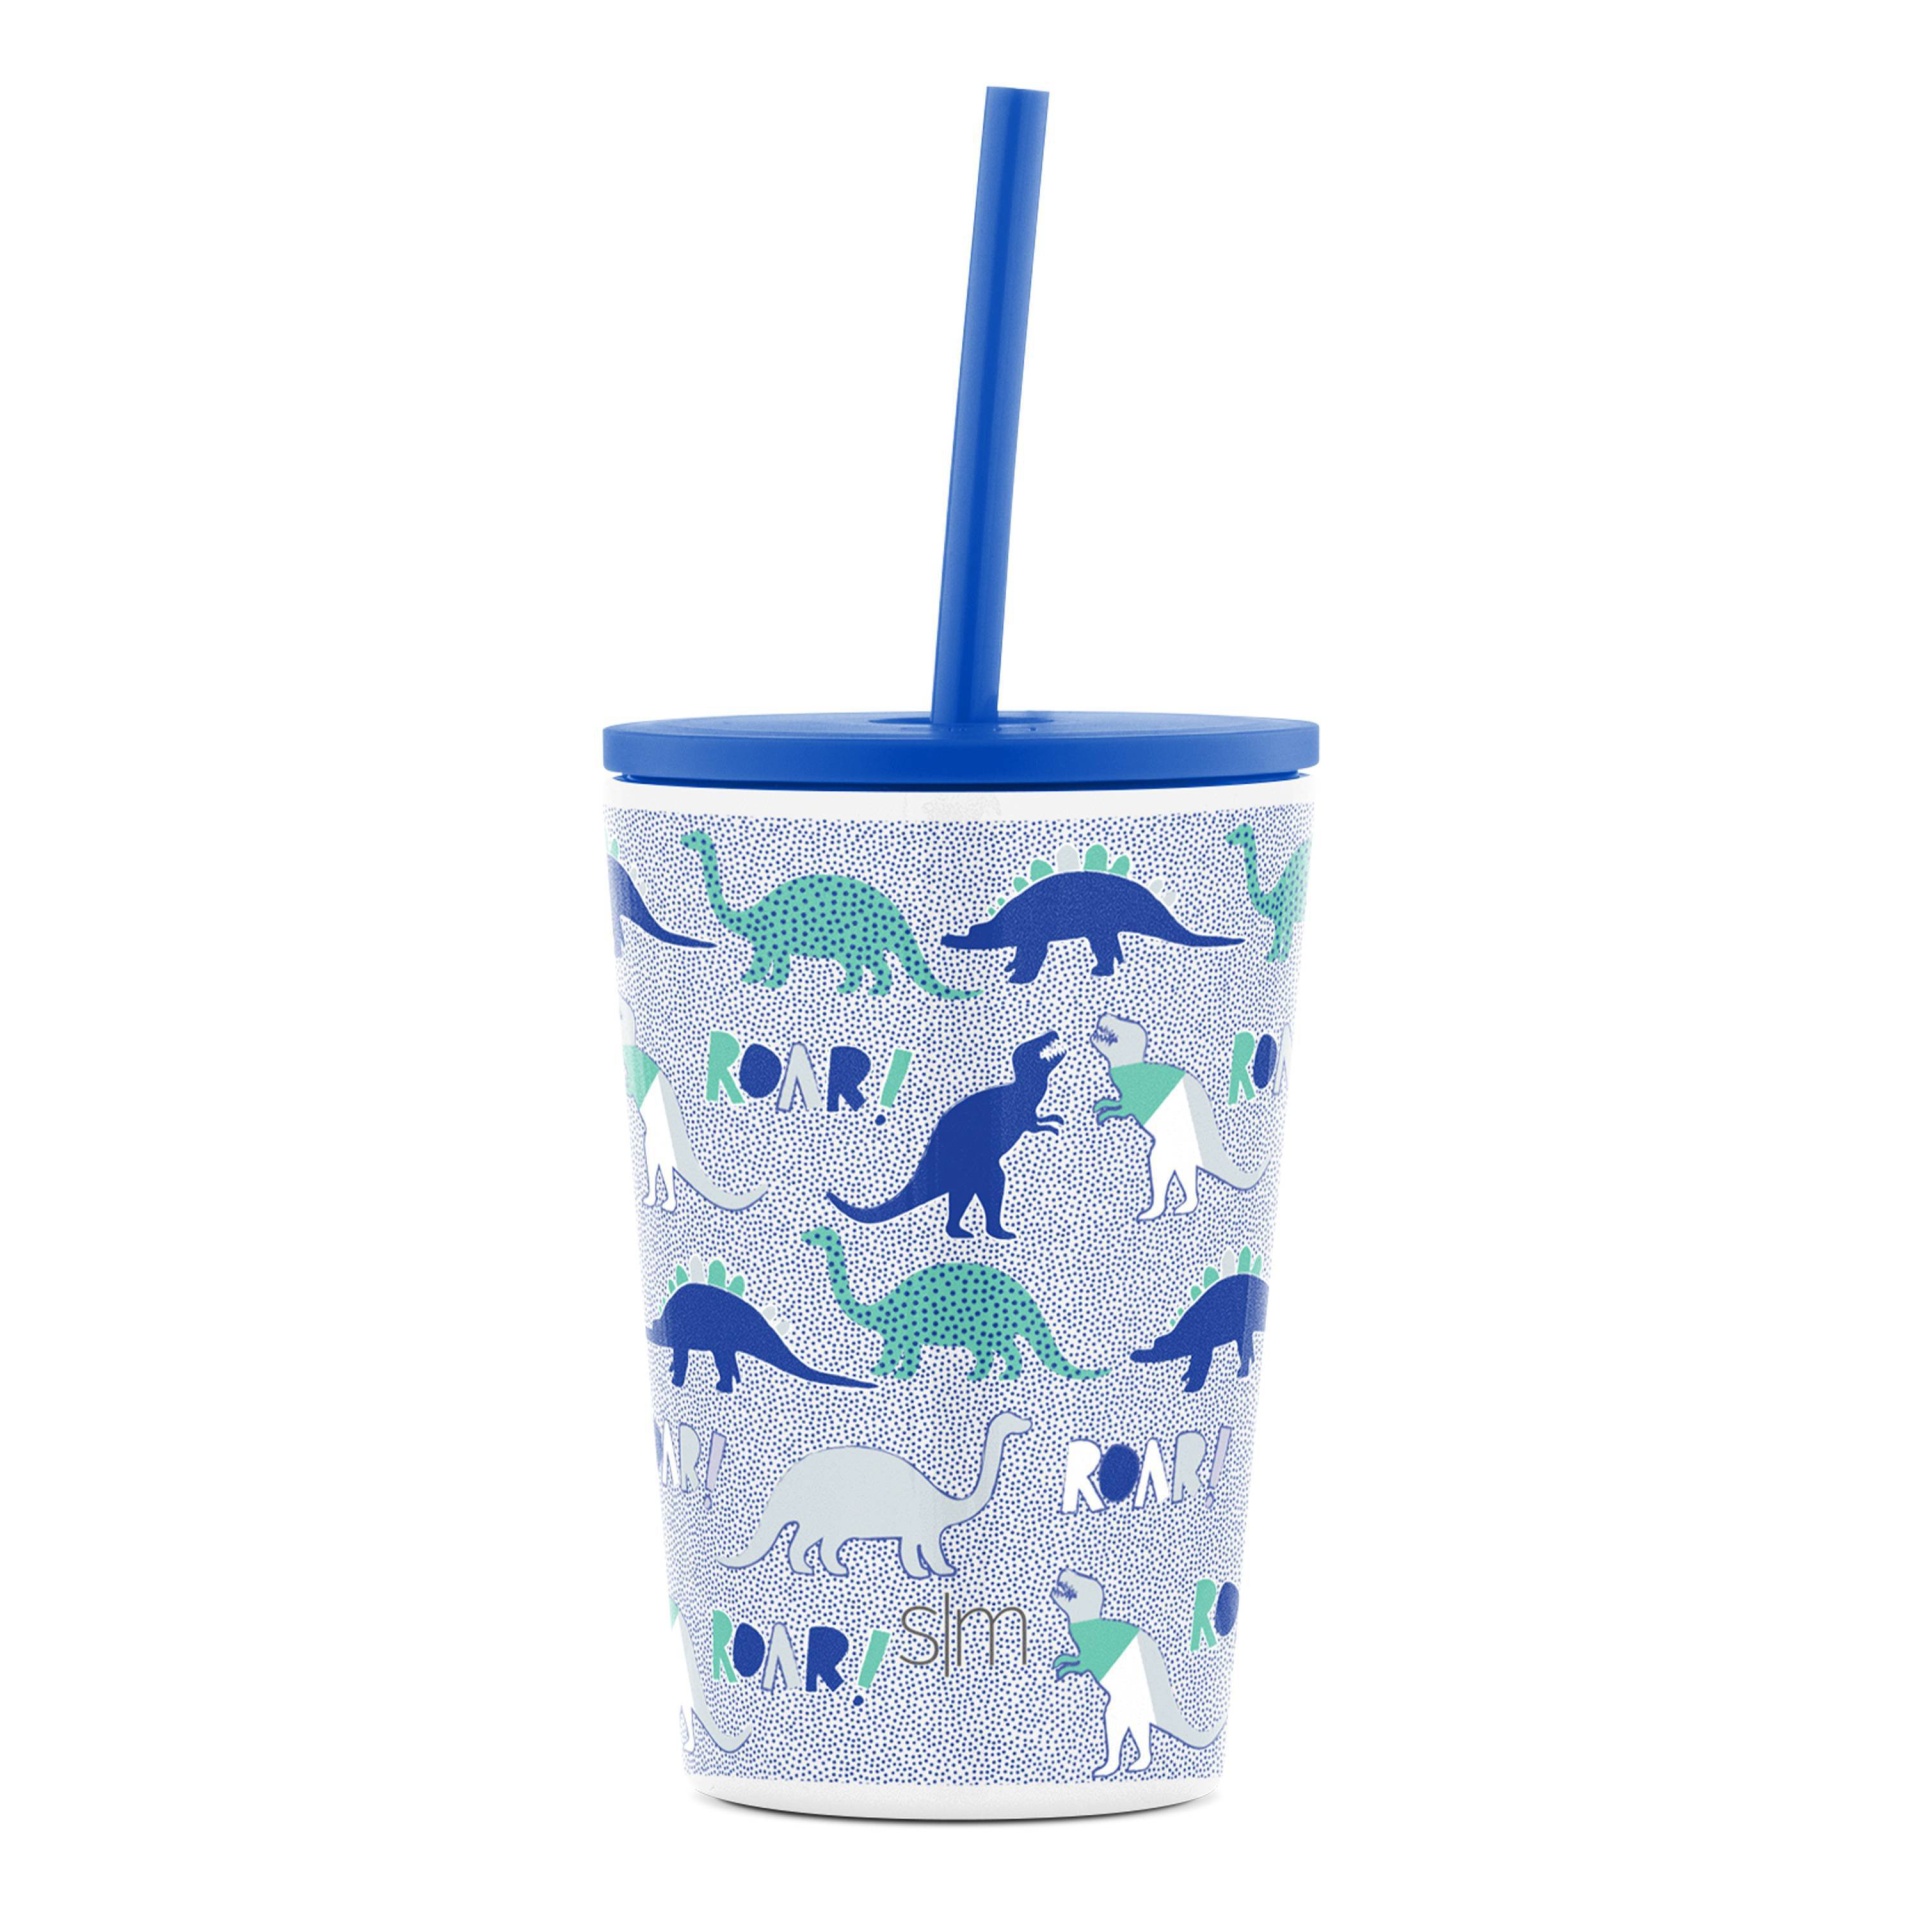 Simple Modern 12oz Stainless Steel Dinosaur Classic Kids Tumbler with Straw  1 ct